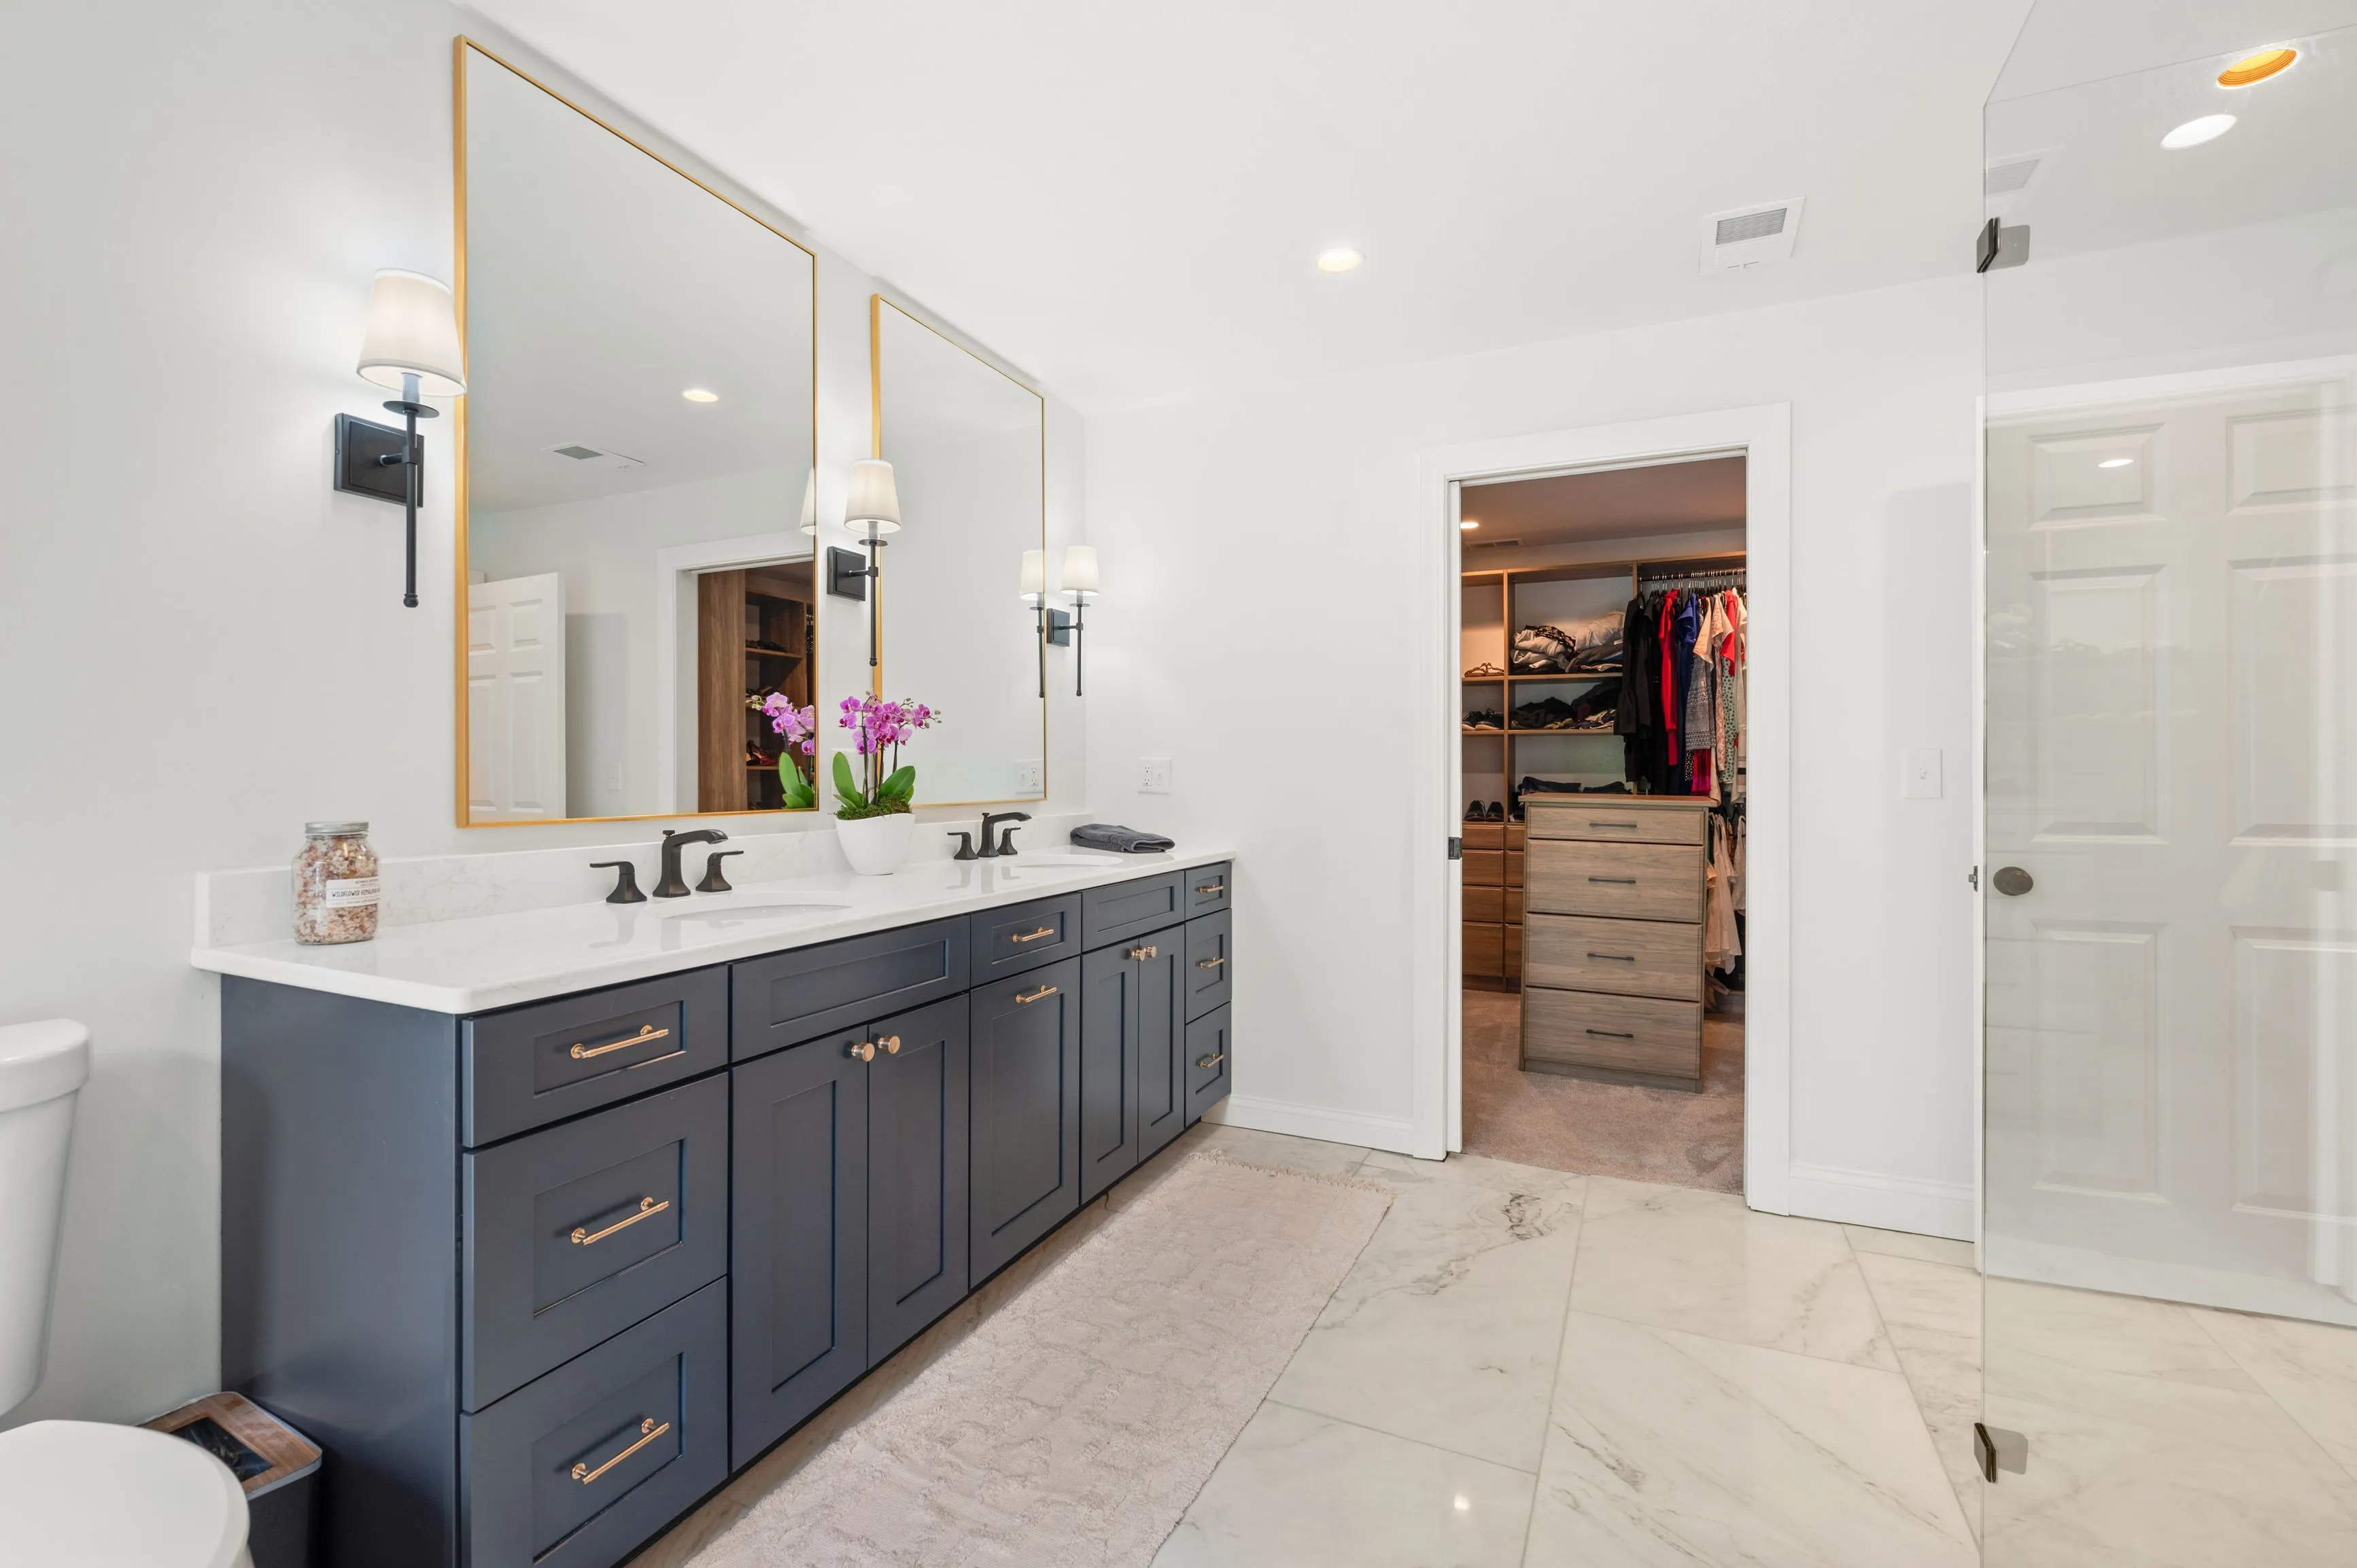 Modern bathroom interior with a double vanity cabinet in navy blue, white marble countertop, large mirror with gold frame, and a walk-in closet visible in the background.